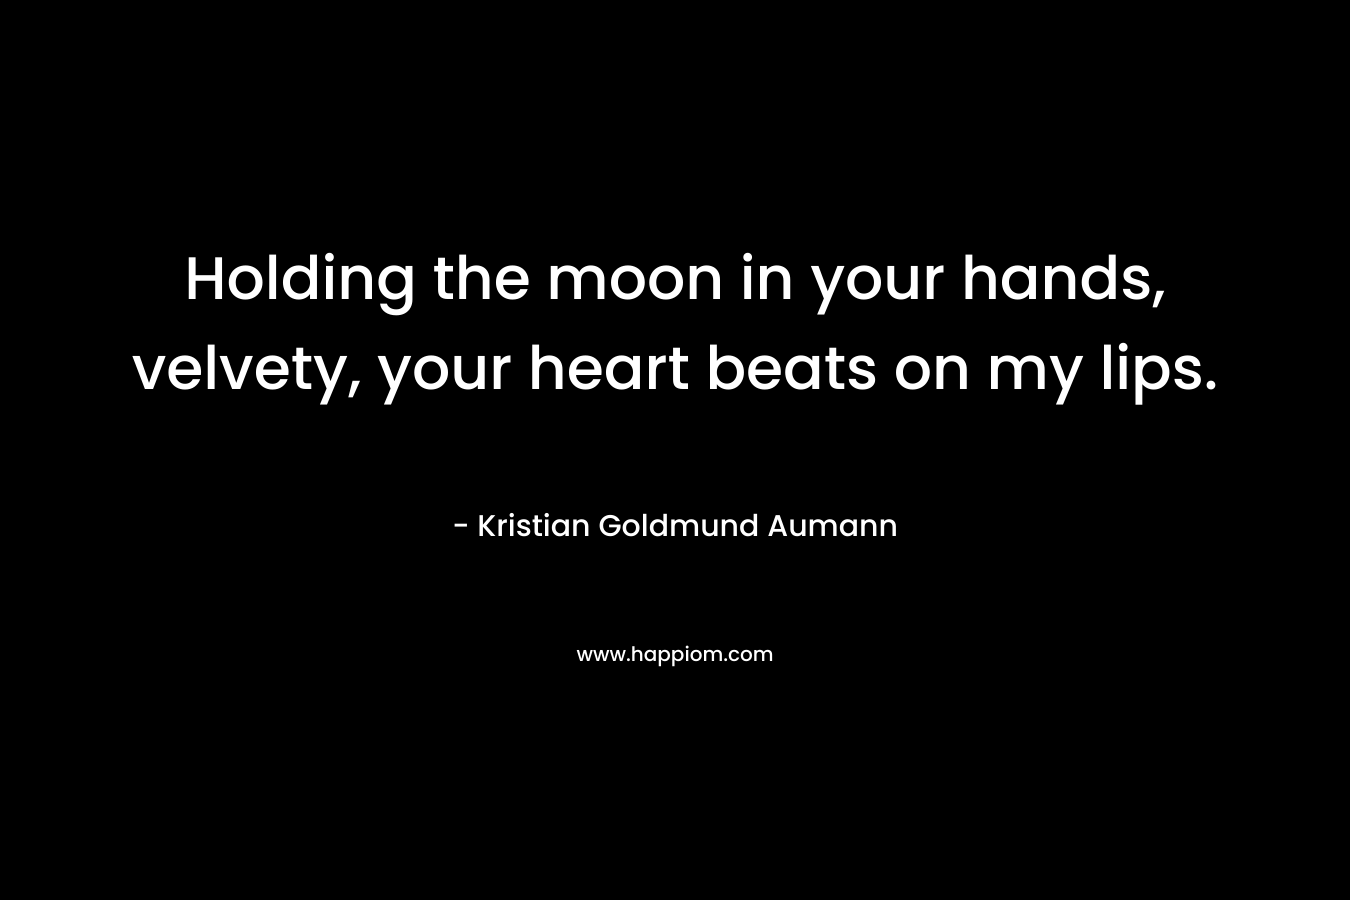 Holding the moon in your hands, velvety, your heart beats on my lips.